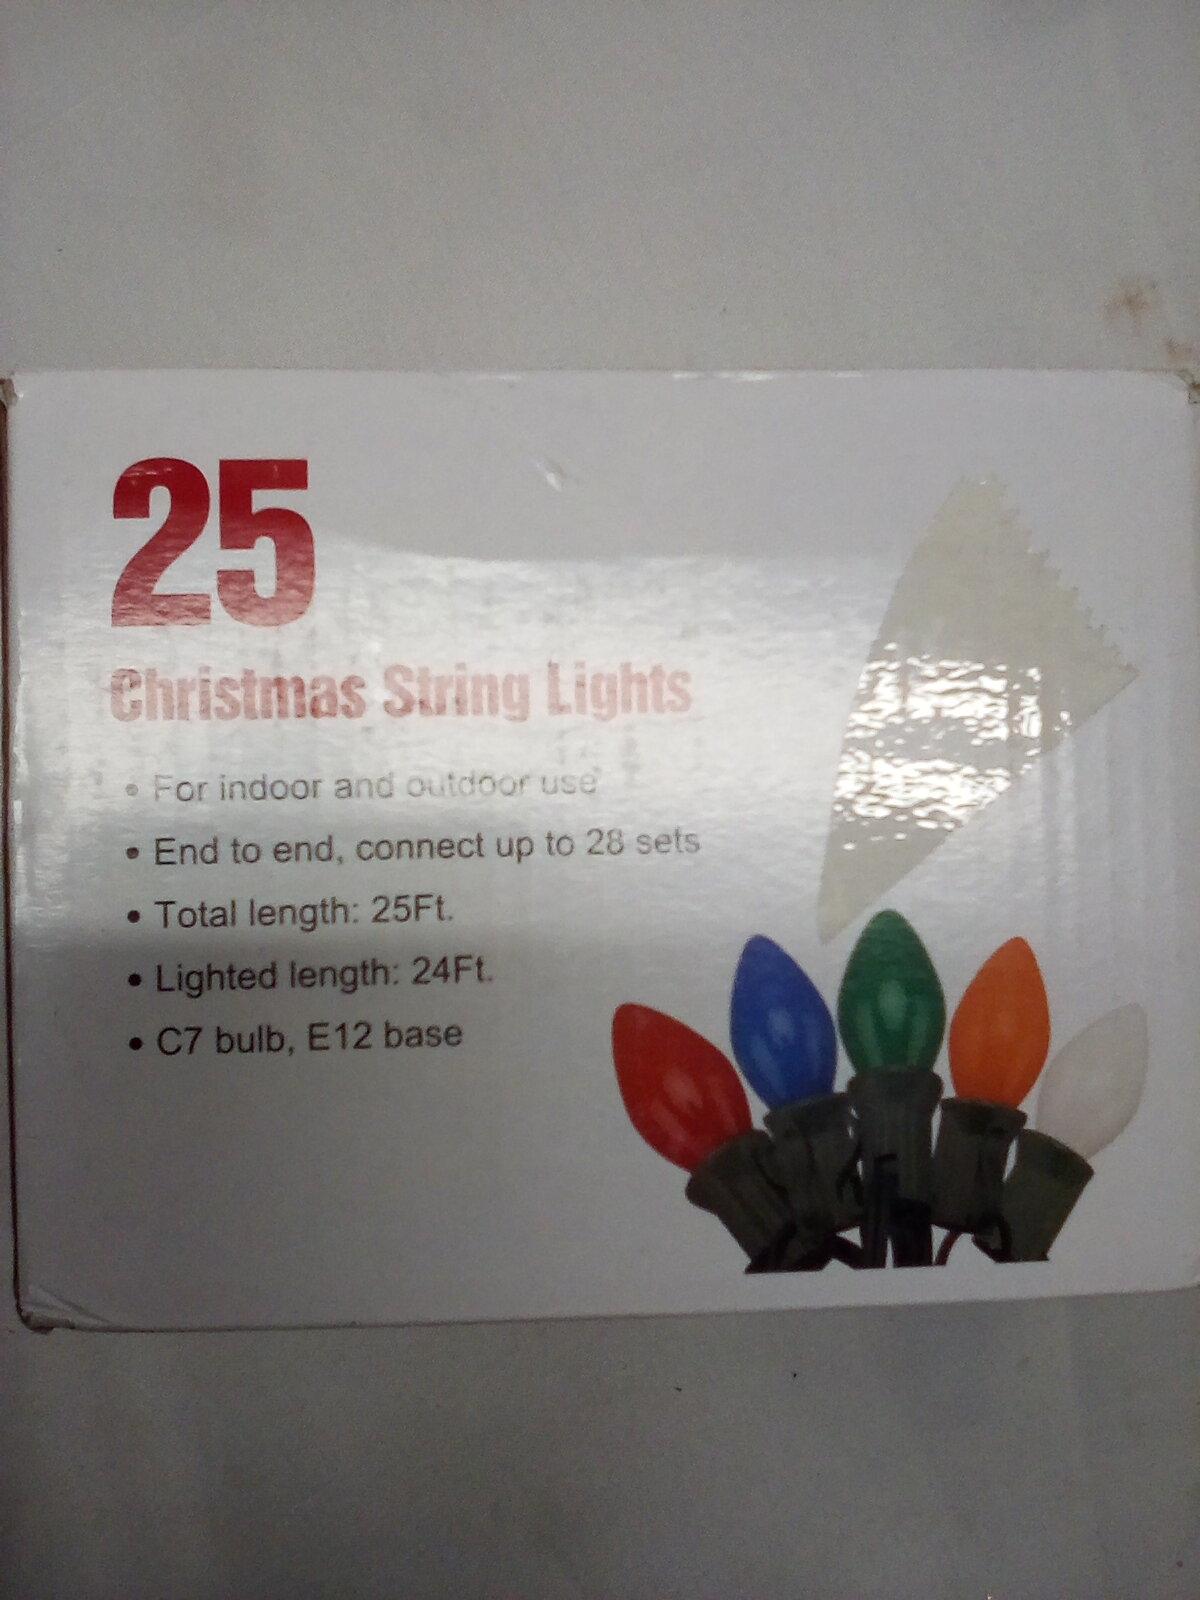 Christmas string lights 25 count, 24ft